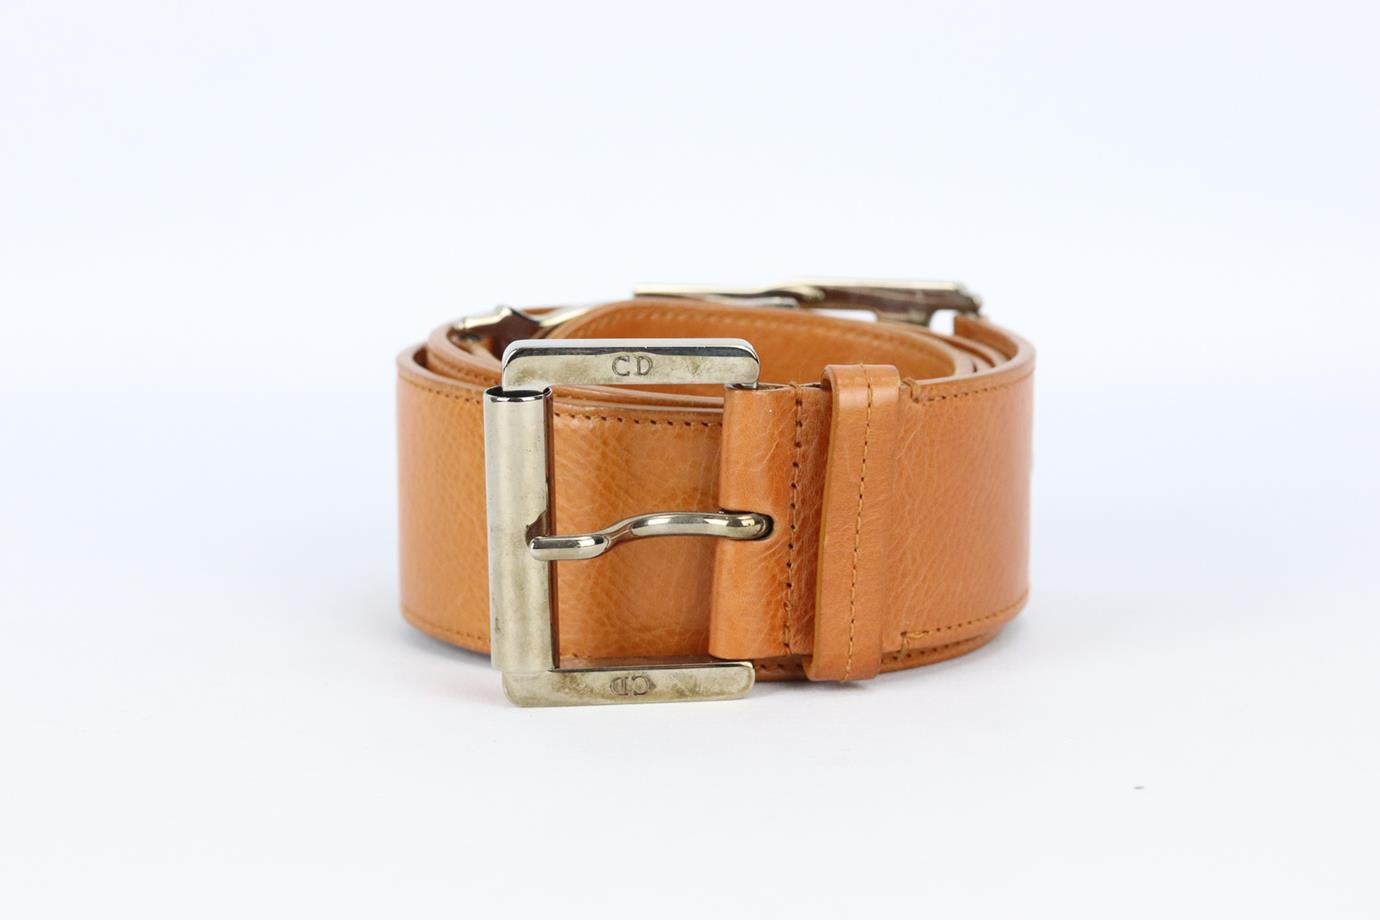 Christian Dior 2005 CD leather belt. Tan. Buckle fastening at front. 100% Leather. Does not come with dustbag or box. Size: 85 cm. Min. Length: 33 in. Max. Length: 35 in. Width: 1.5 in. Very good condition - No sign of wear; see pictures.
